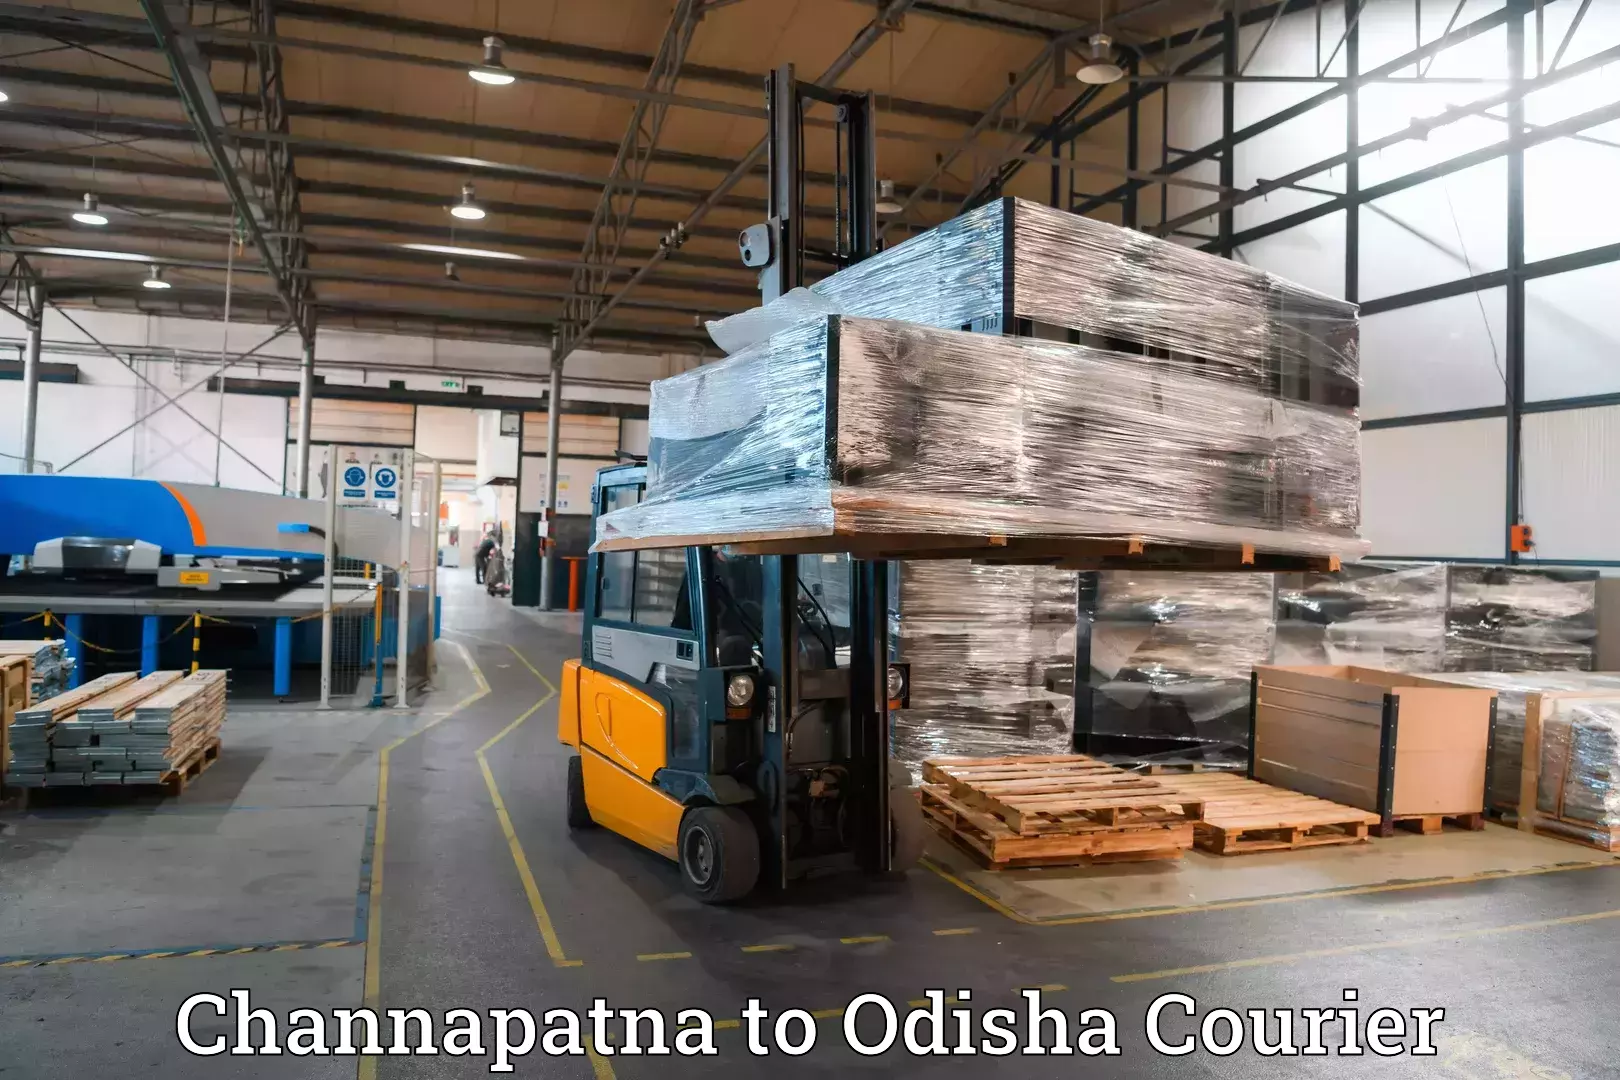 Baggage transport quote Channapatna to Paradip Port